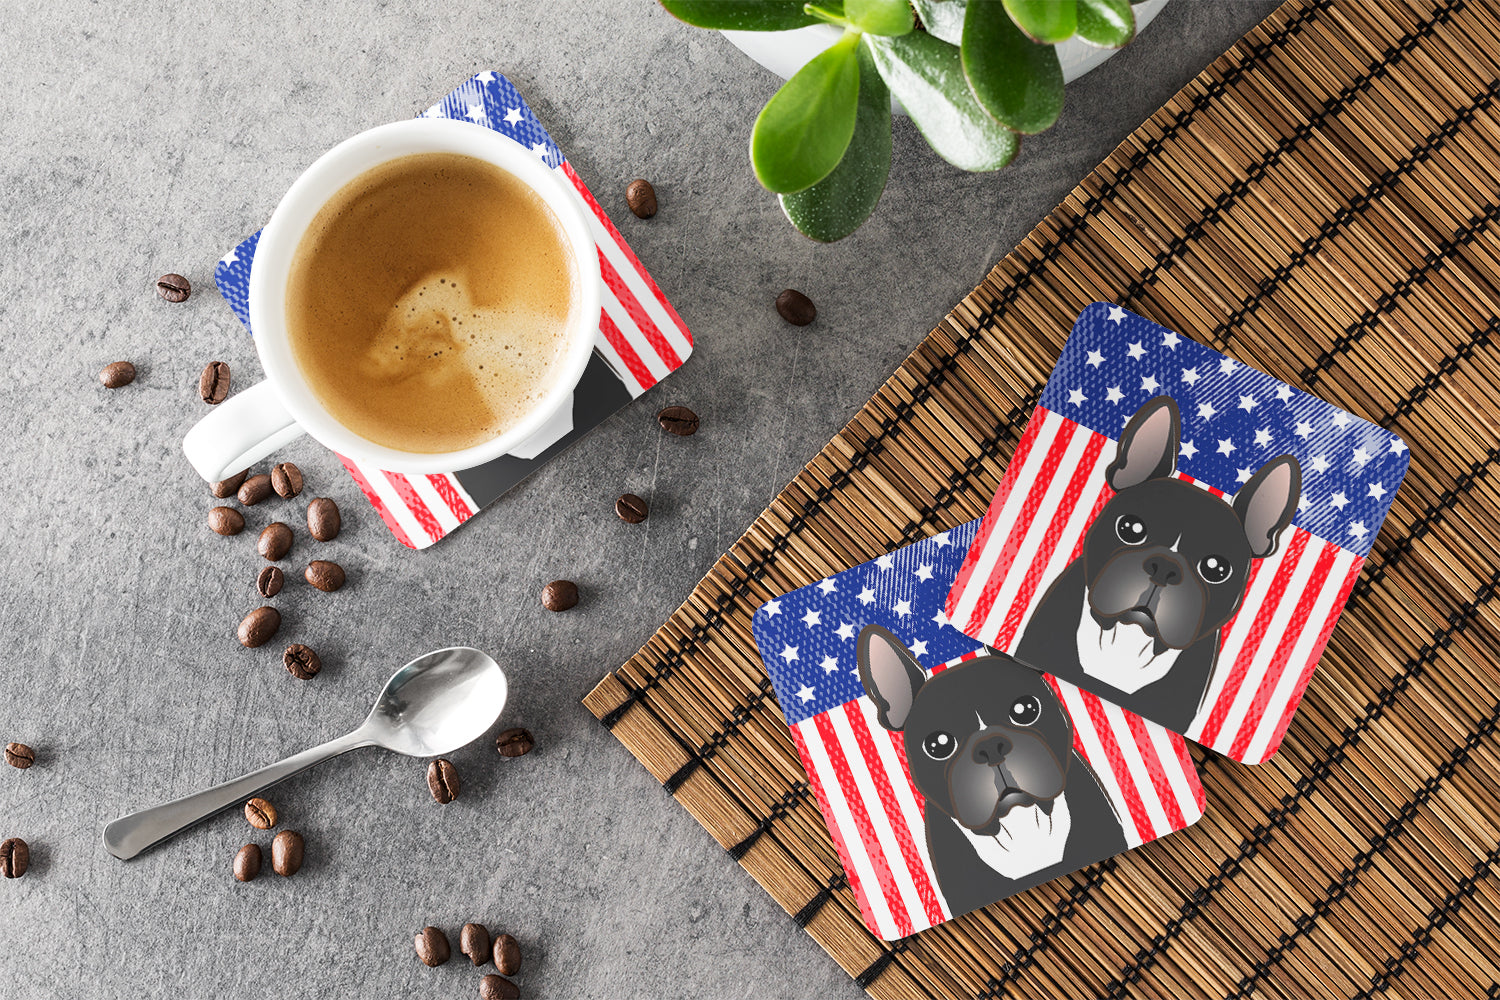 American Flag and French Bulldog Foam Coaster Set of 4 - the-store.com